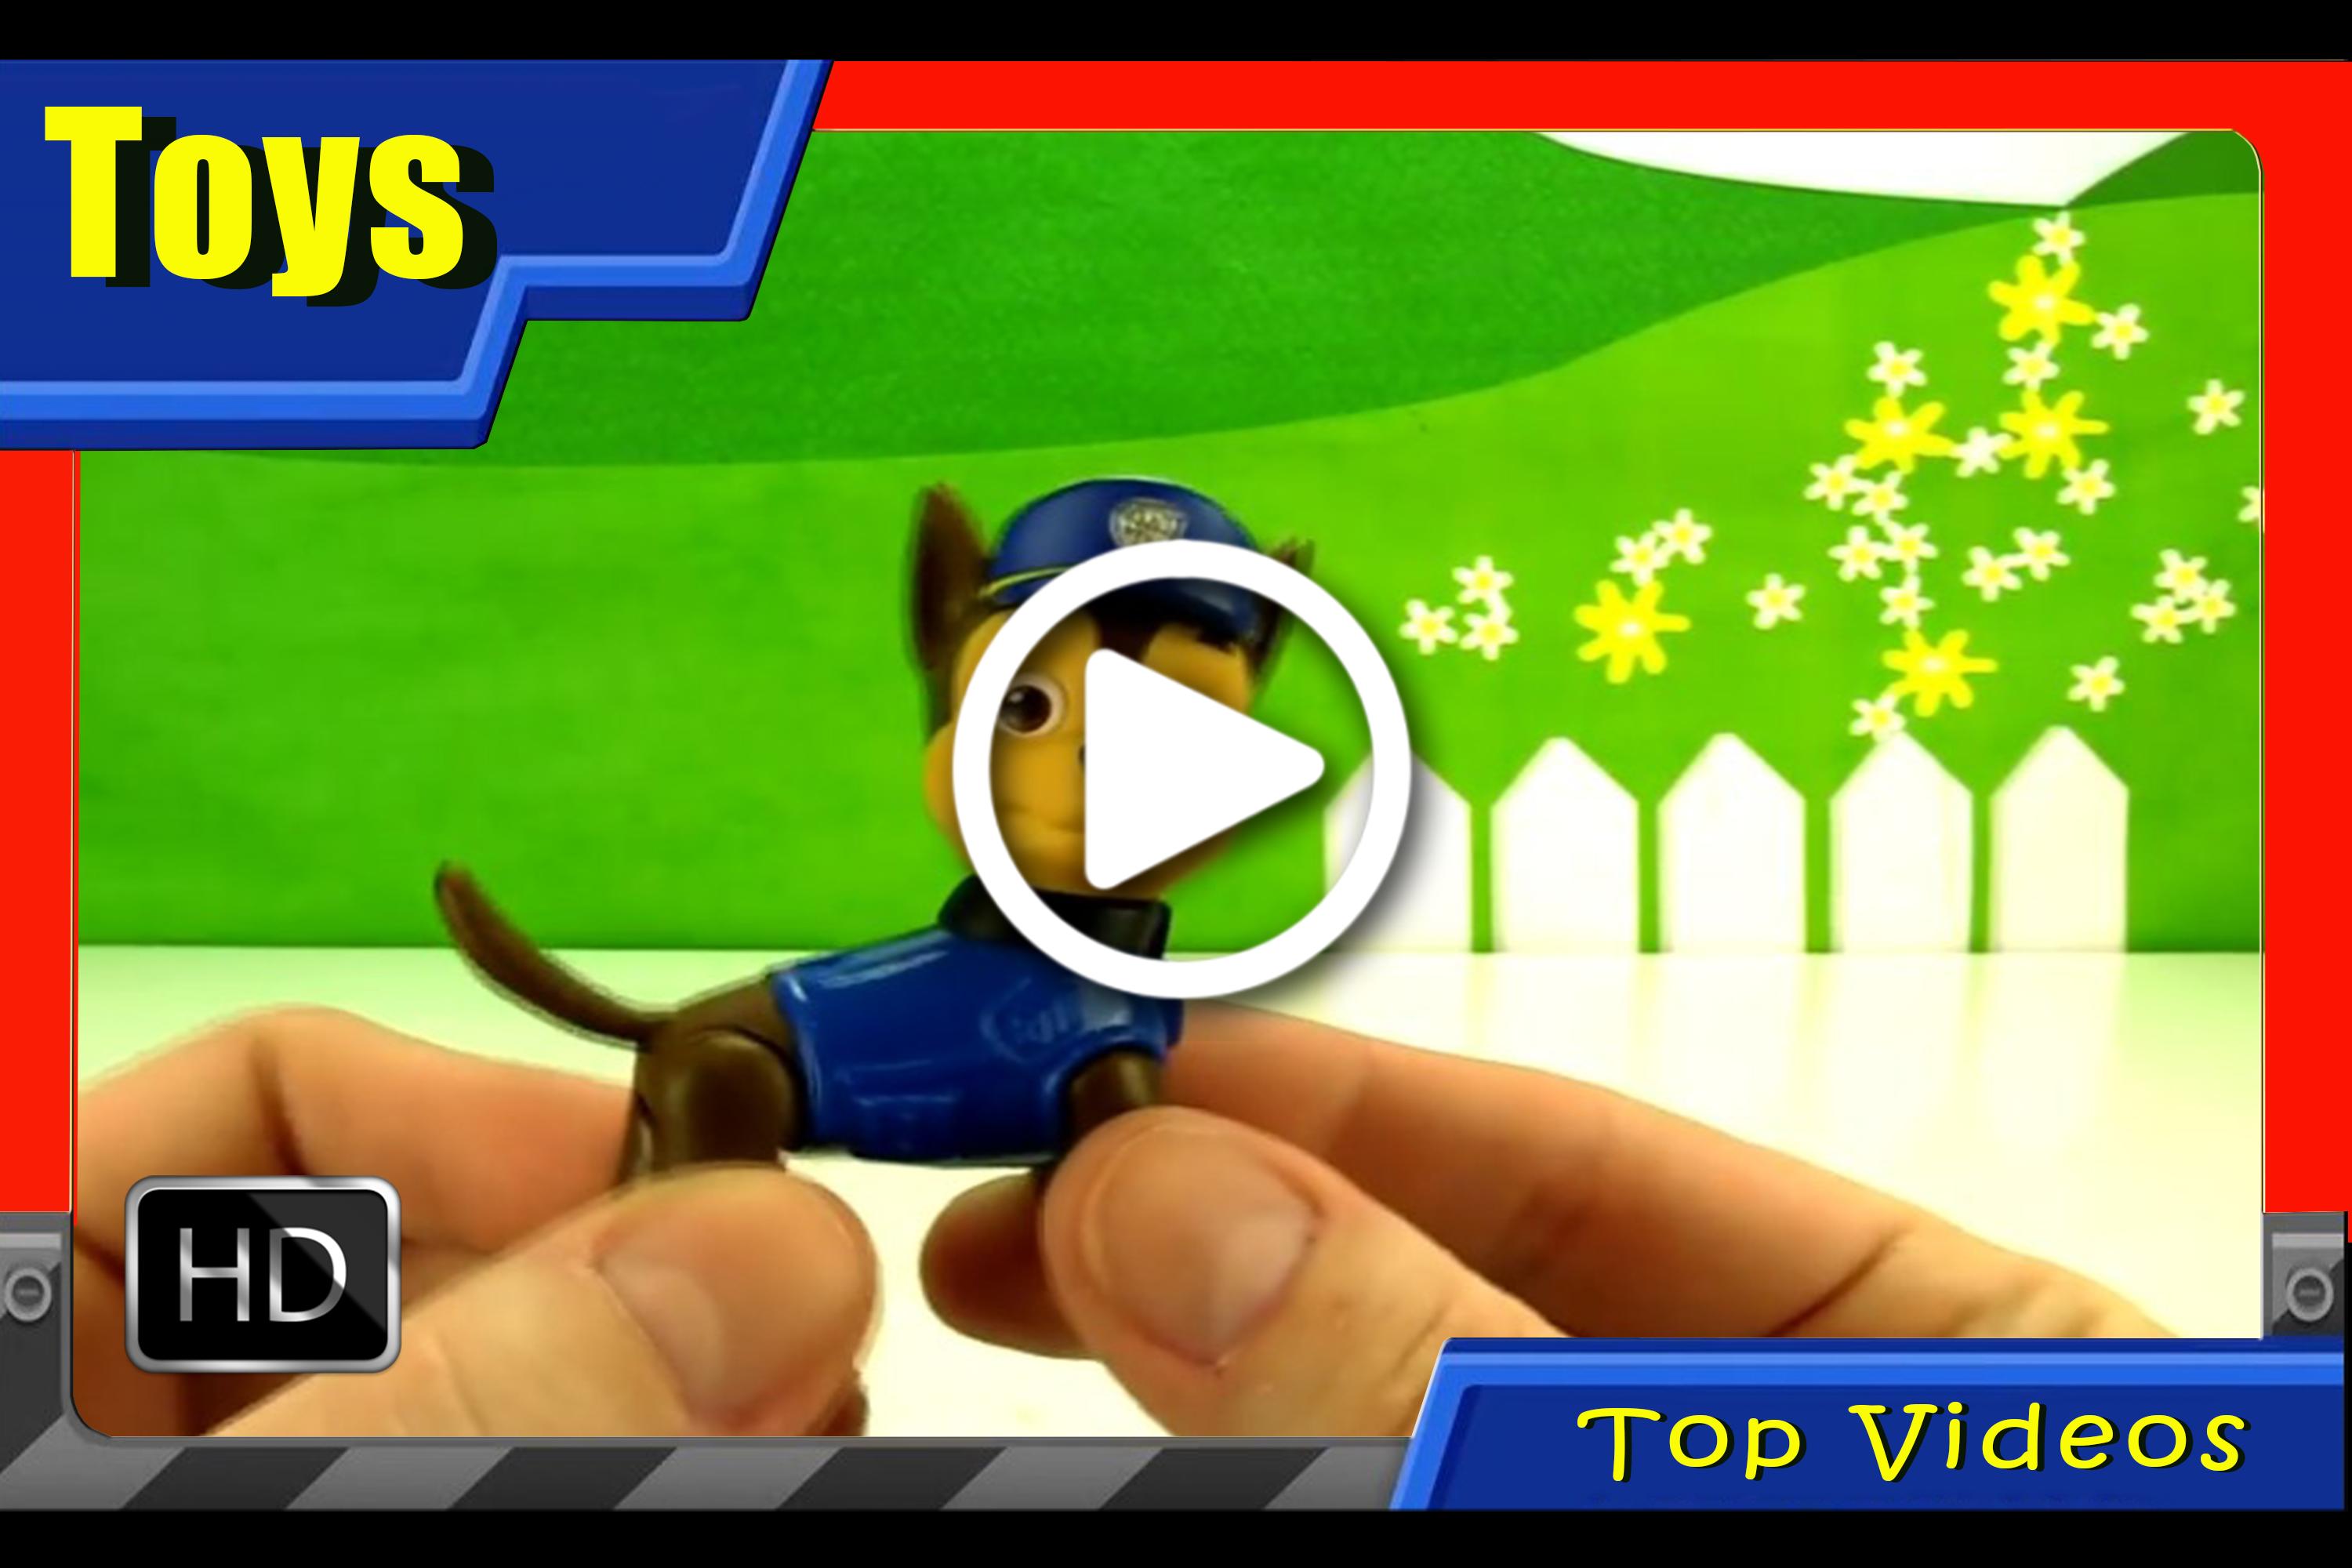 Paw Patrol Toys Top Video for Android - APK Download